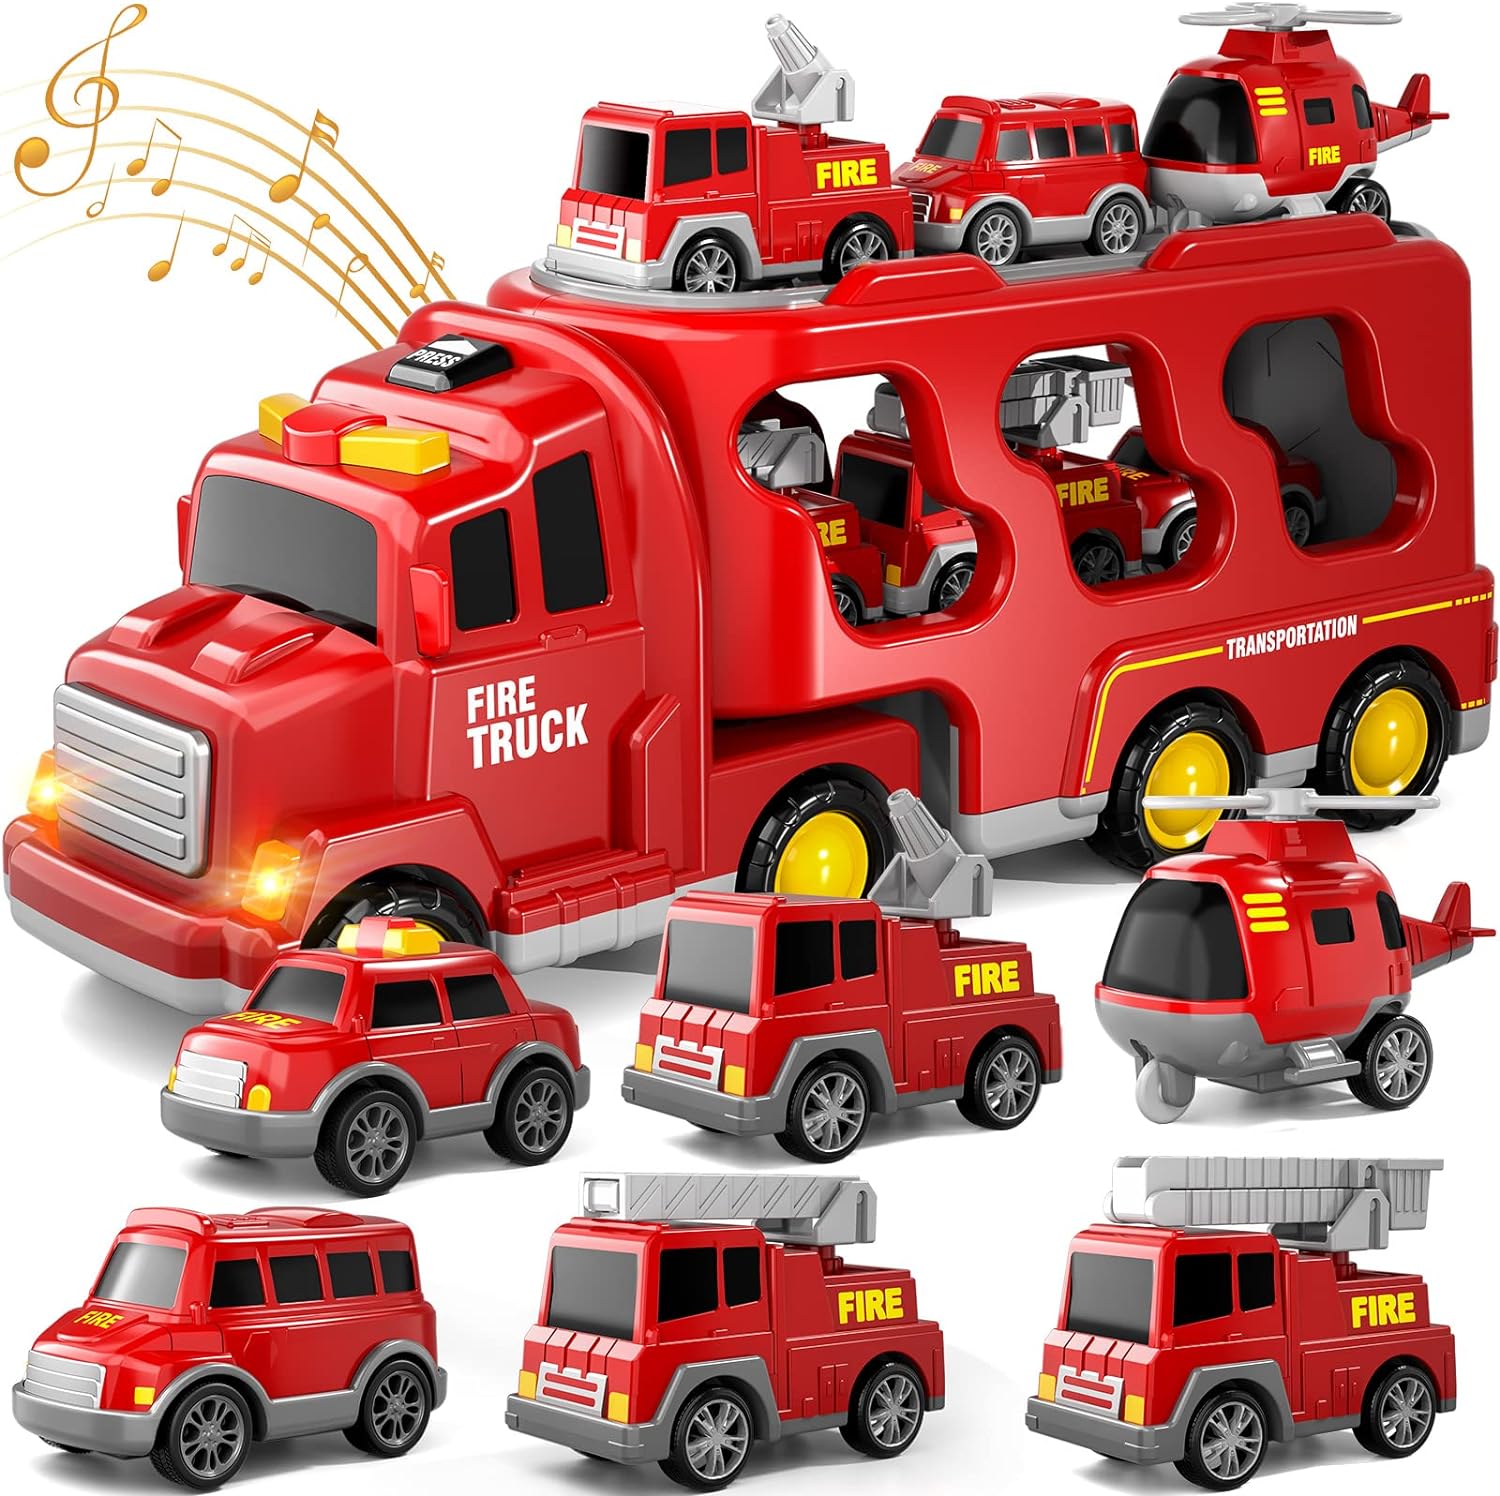 Police Truck Toys Toddlers 3 4 5 6 Years Old, 5 in 1 Truck Friction Power Toy Car